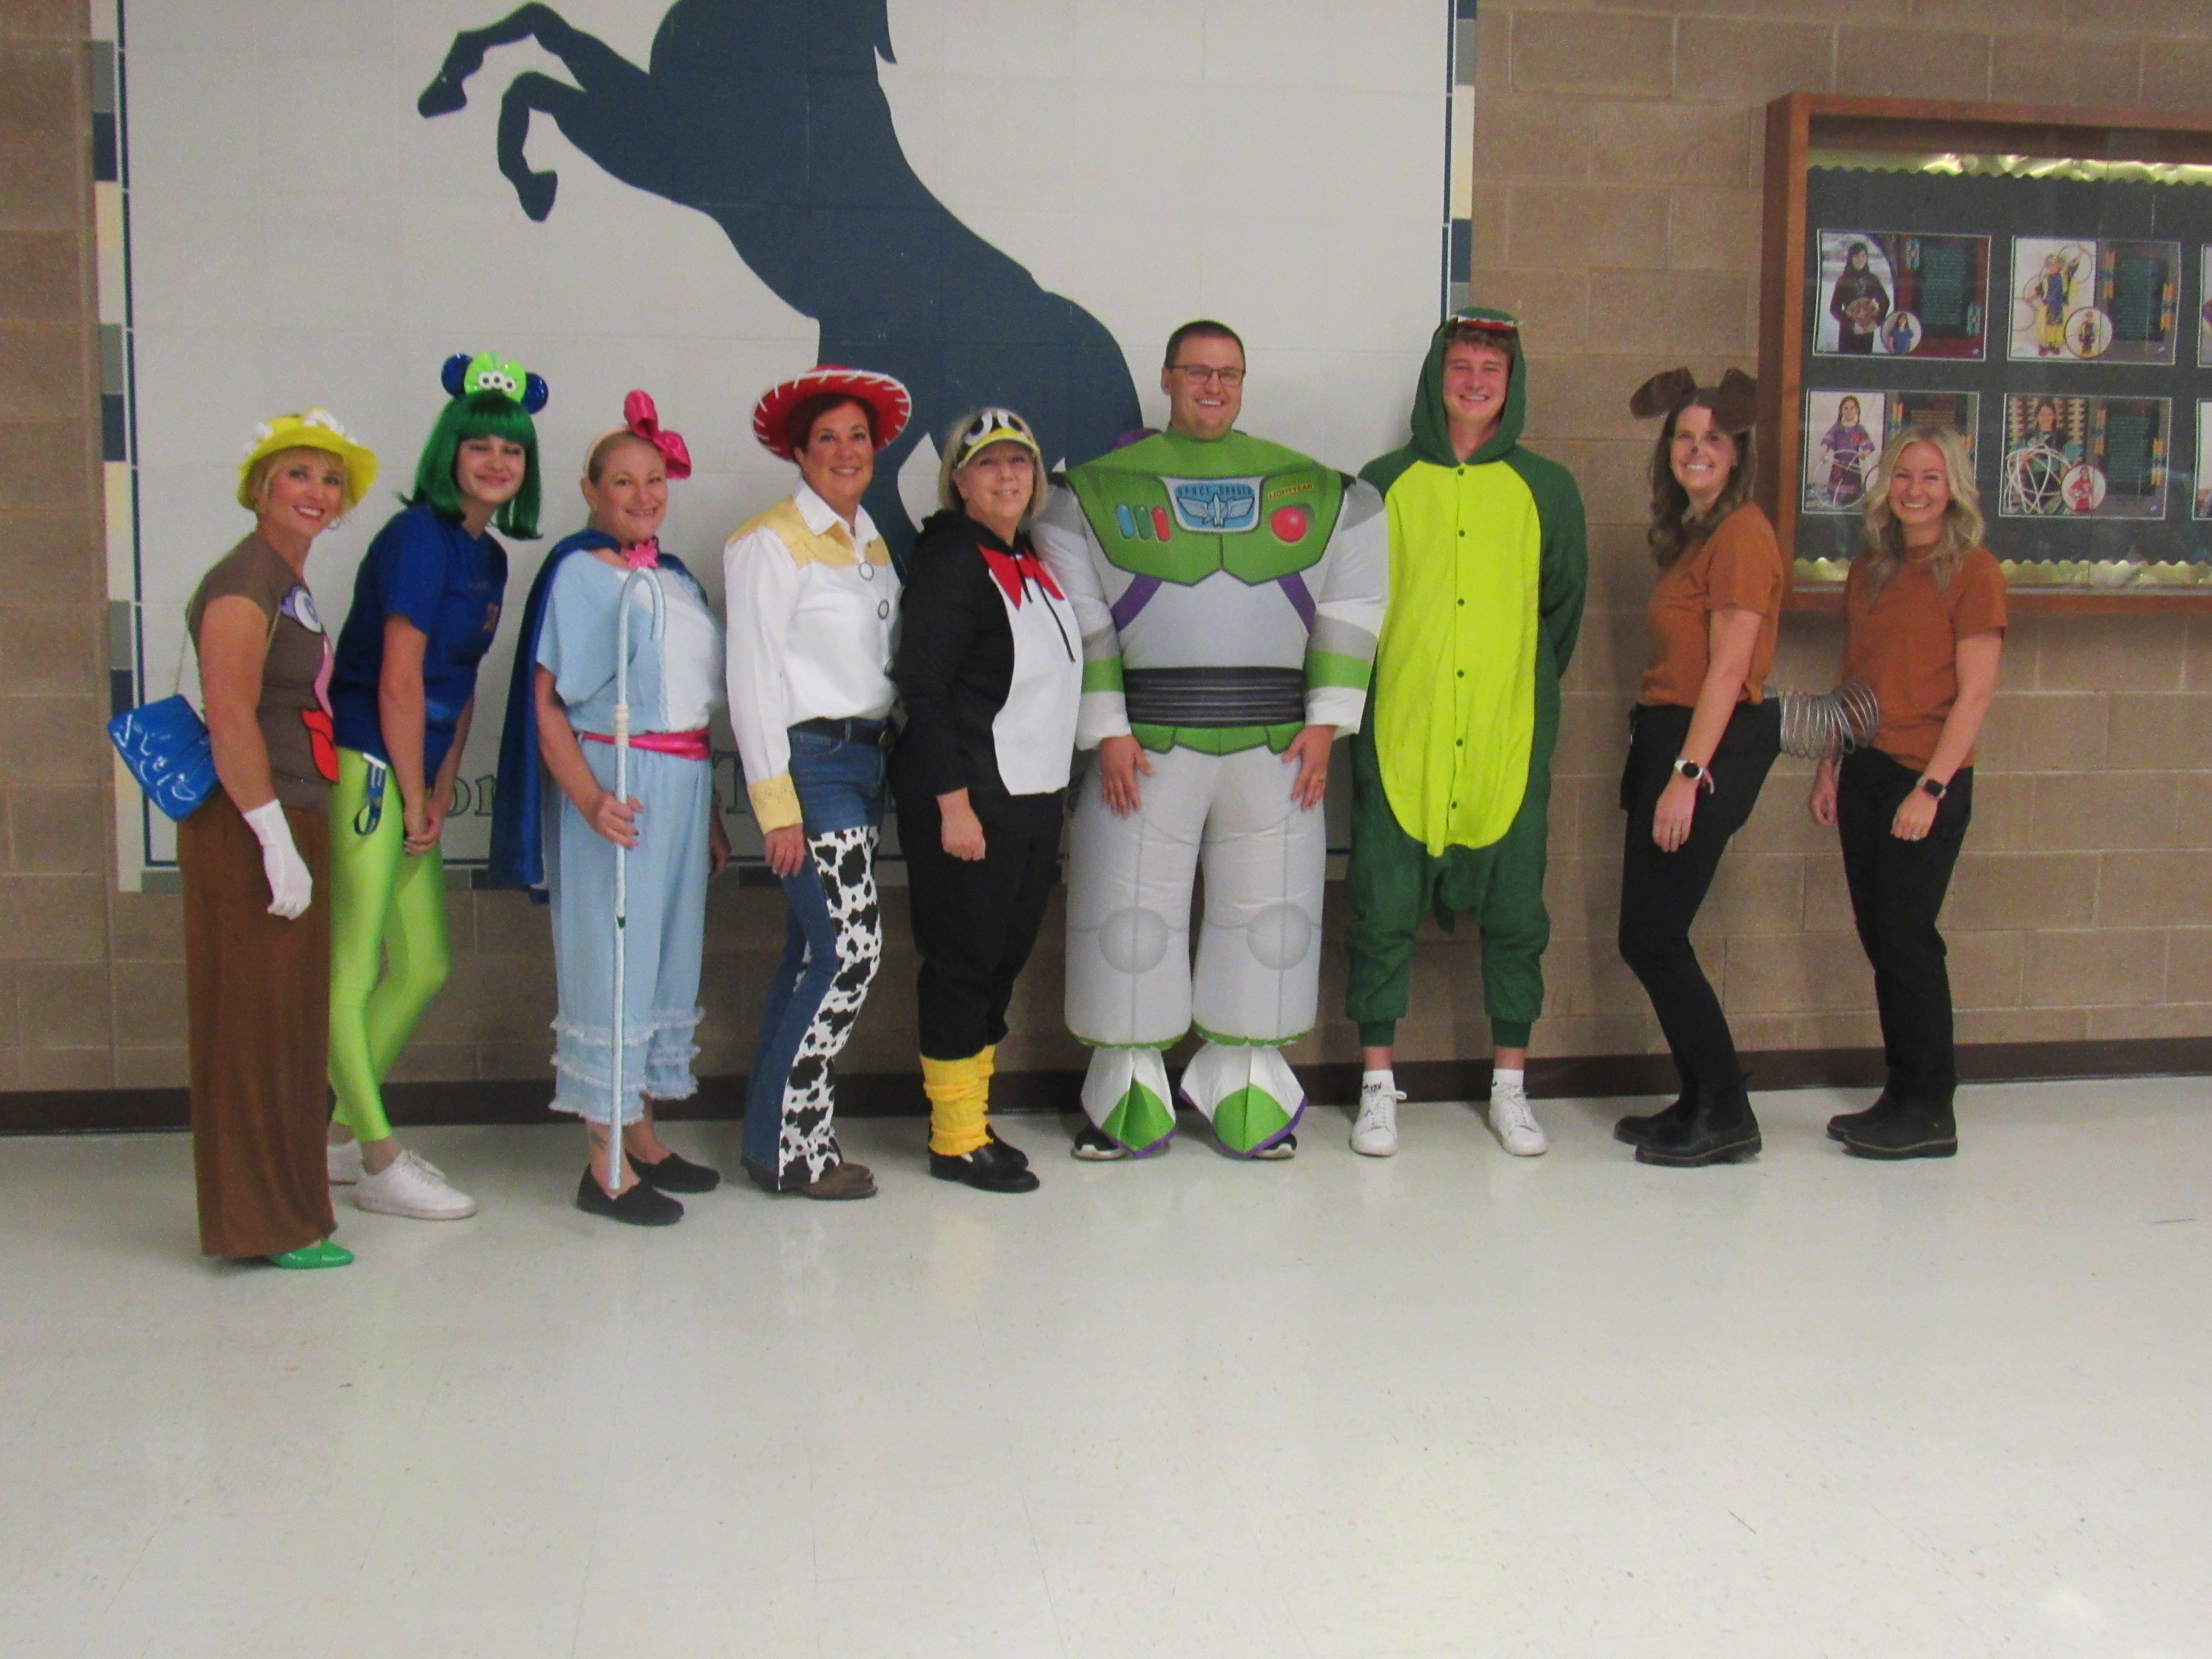 Admin Team: Toy Story 